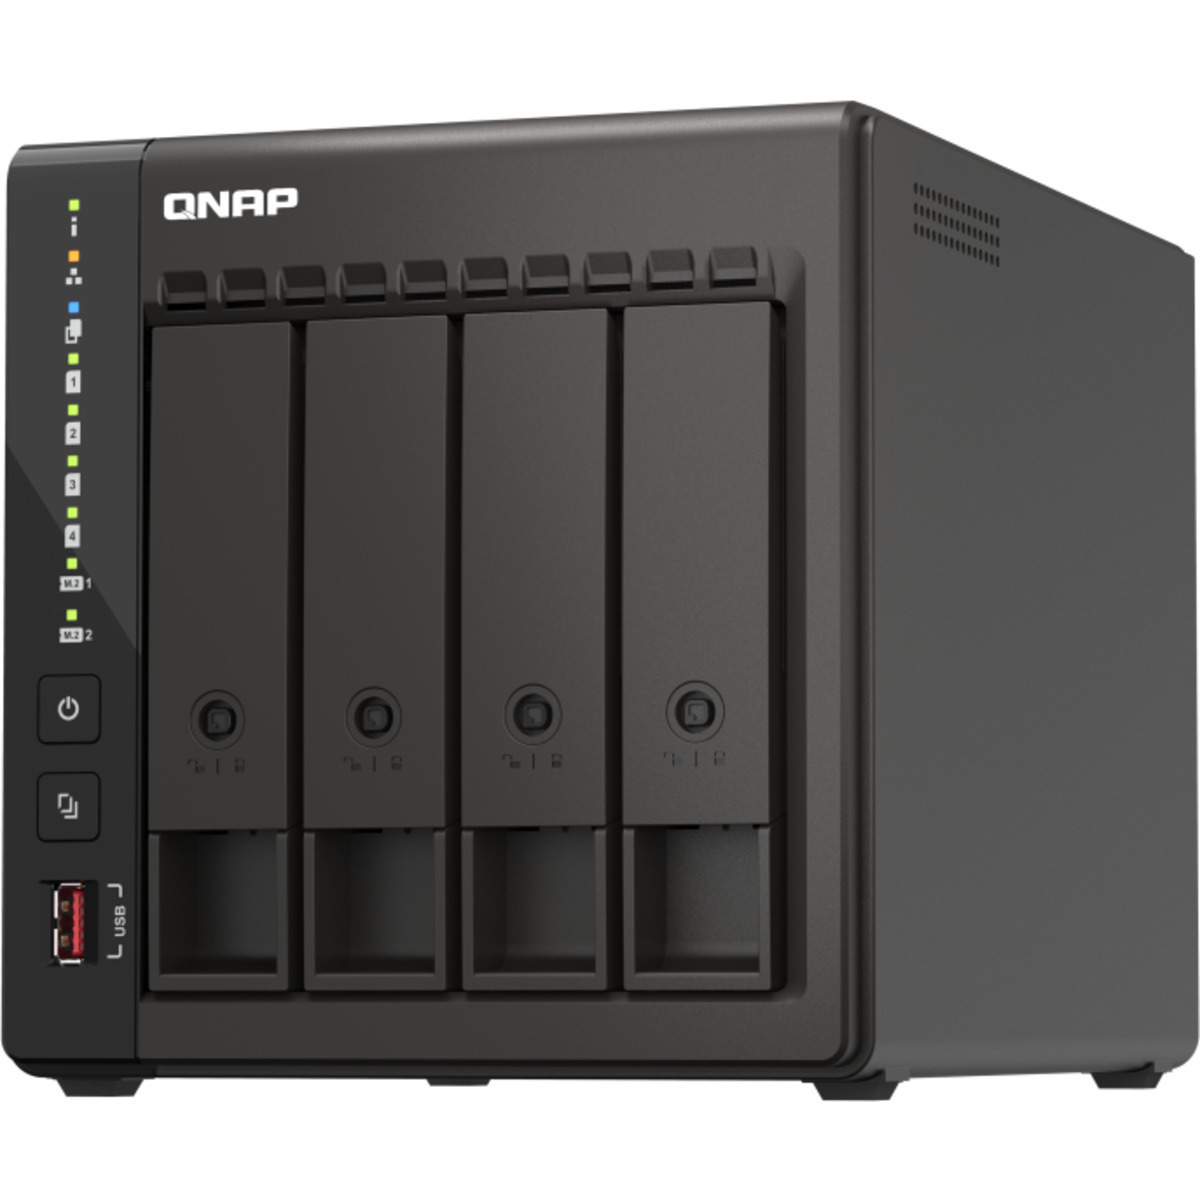 QNAP TS-453E 72tb 4-Bay Desktop Multimedia / Power User / Business NAS - Network Attached Storage Device 3x24tb Seagate IronWolf Pro ST24000NT002 3.5 7200rpm SATA 6Gb/s HDD NAS Class Drives Installed - Burn-In Tested TS-453E